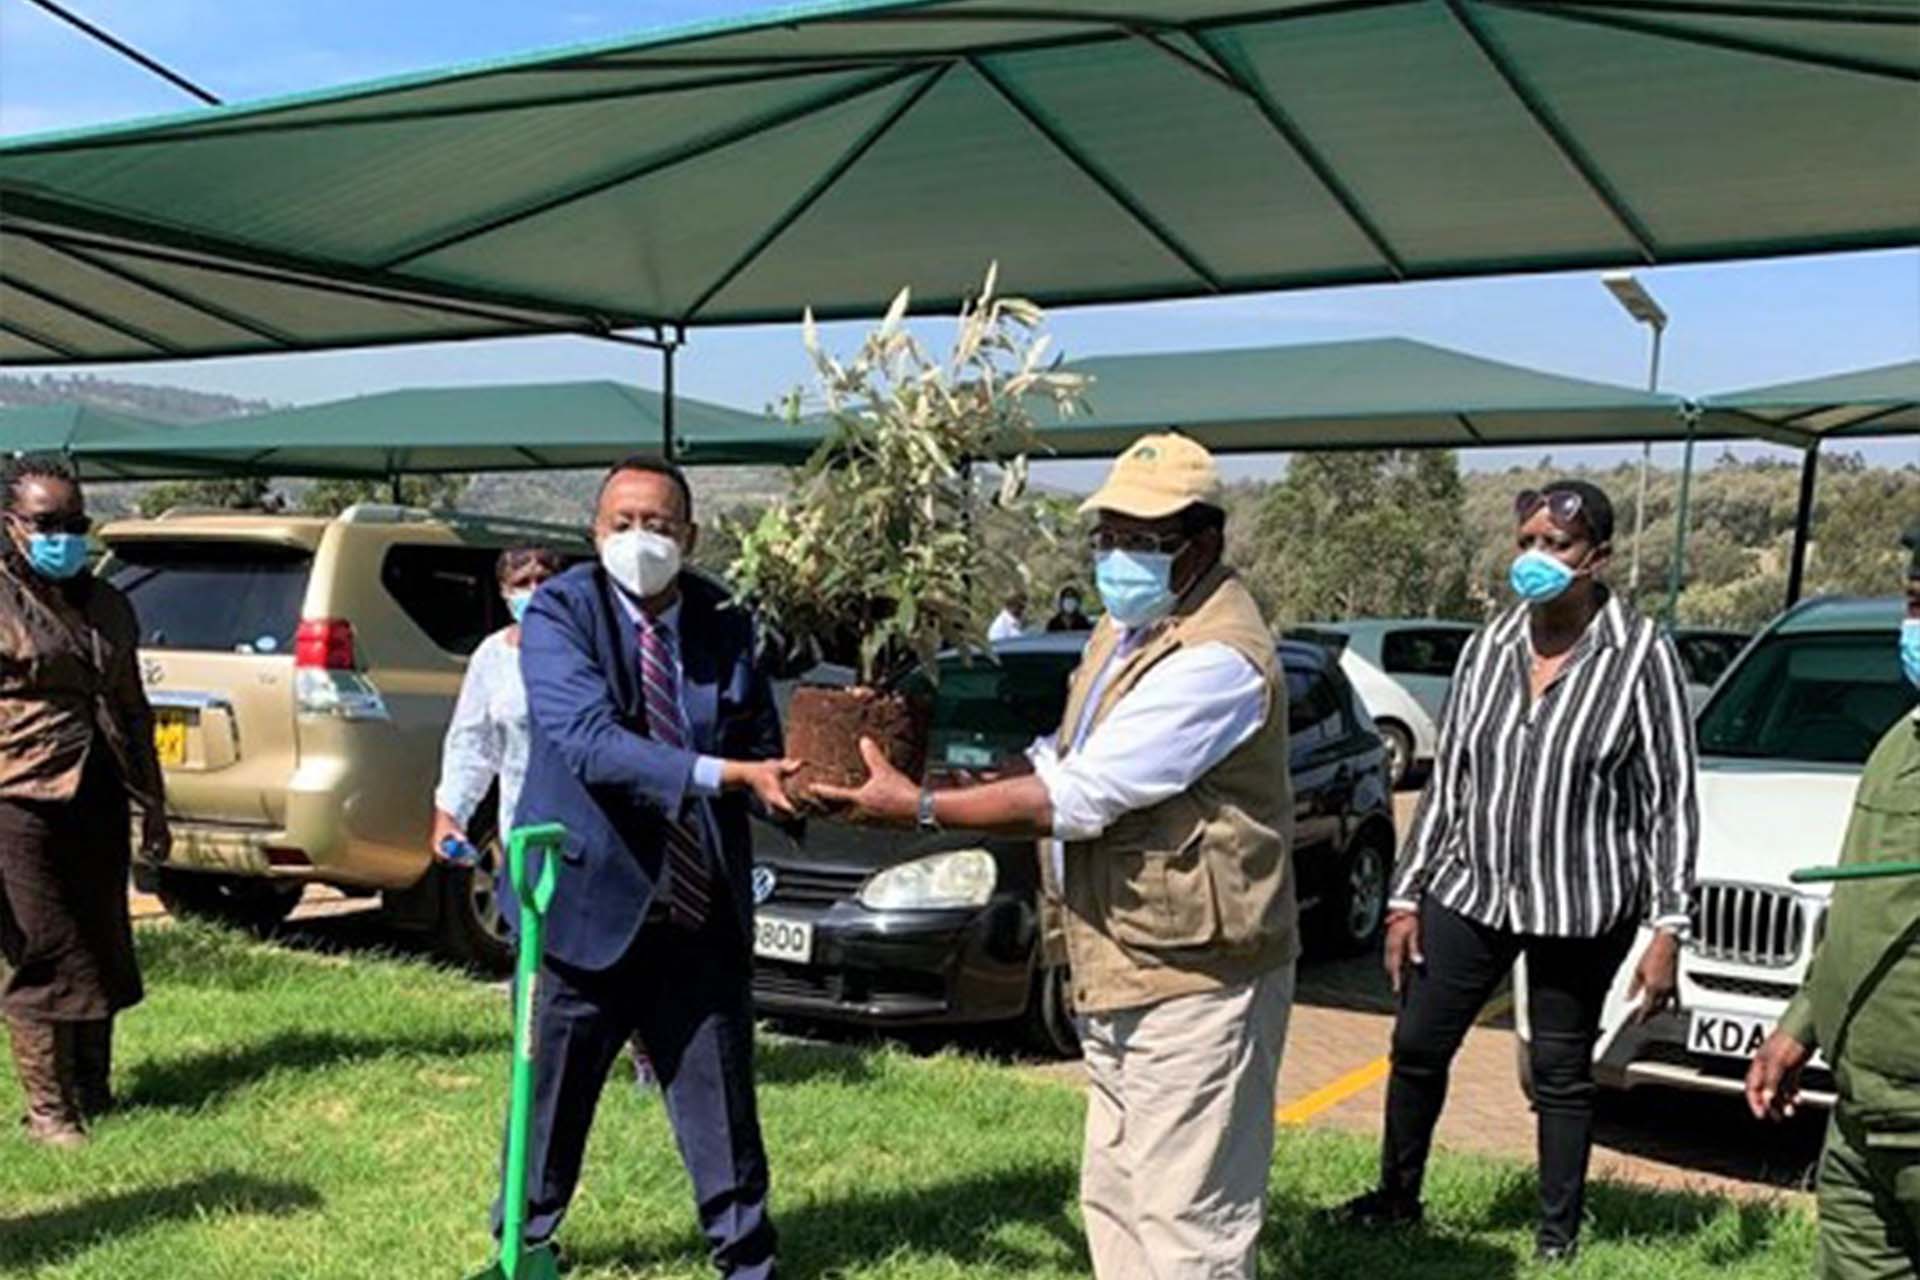 Cabinet Secretary For The Ministry Of Environment And Forestry In Kenya Leads Tree Planting At IGAD Climate Center